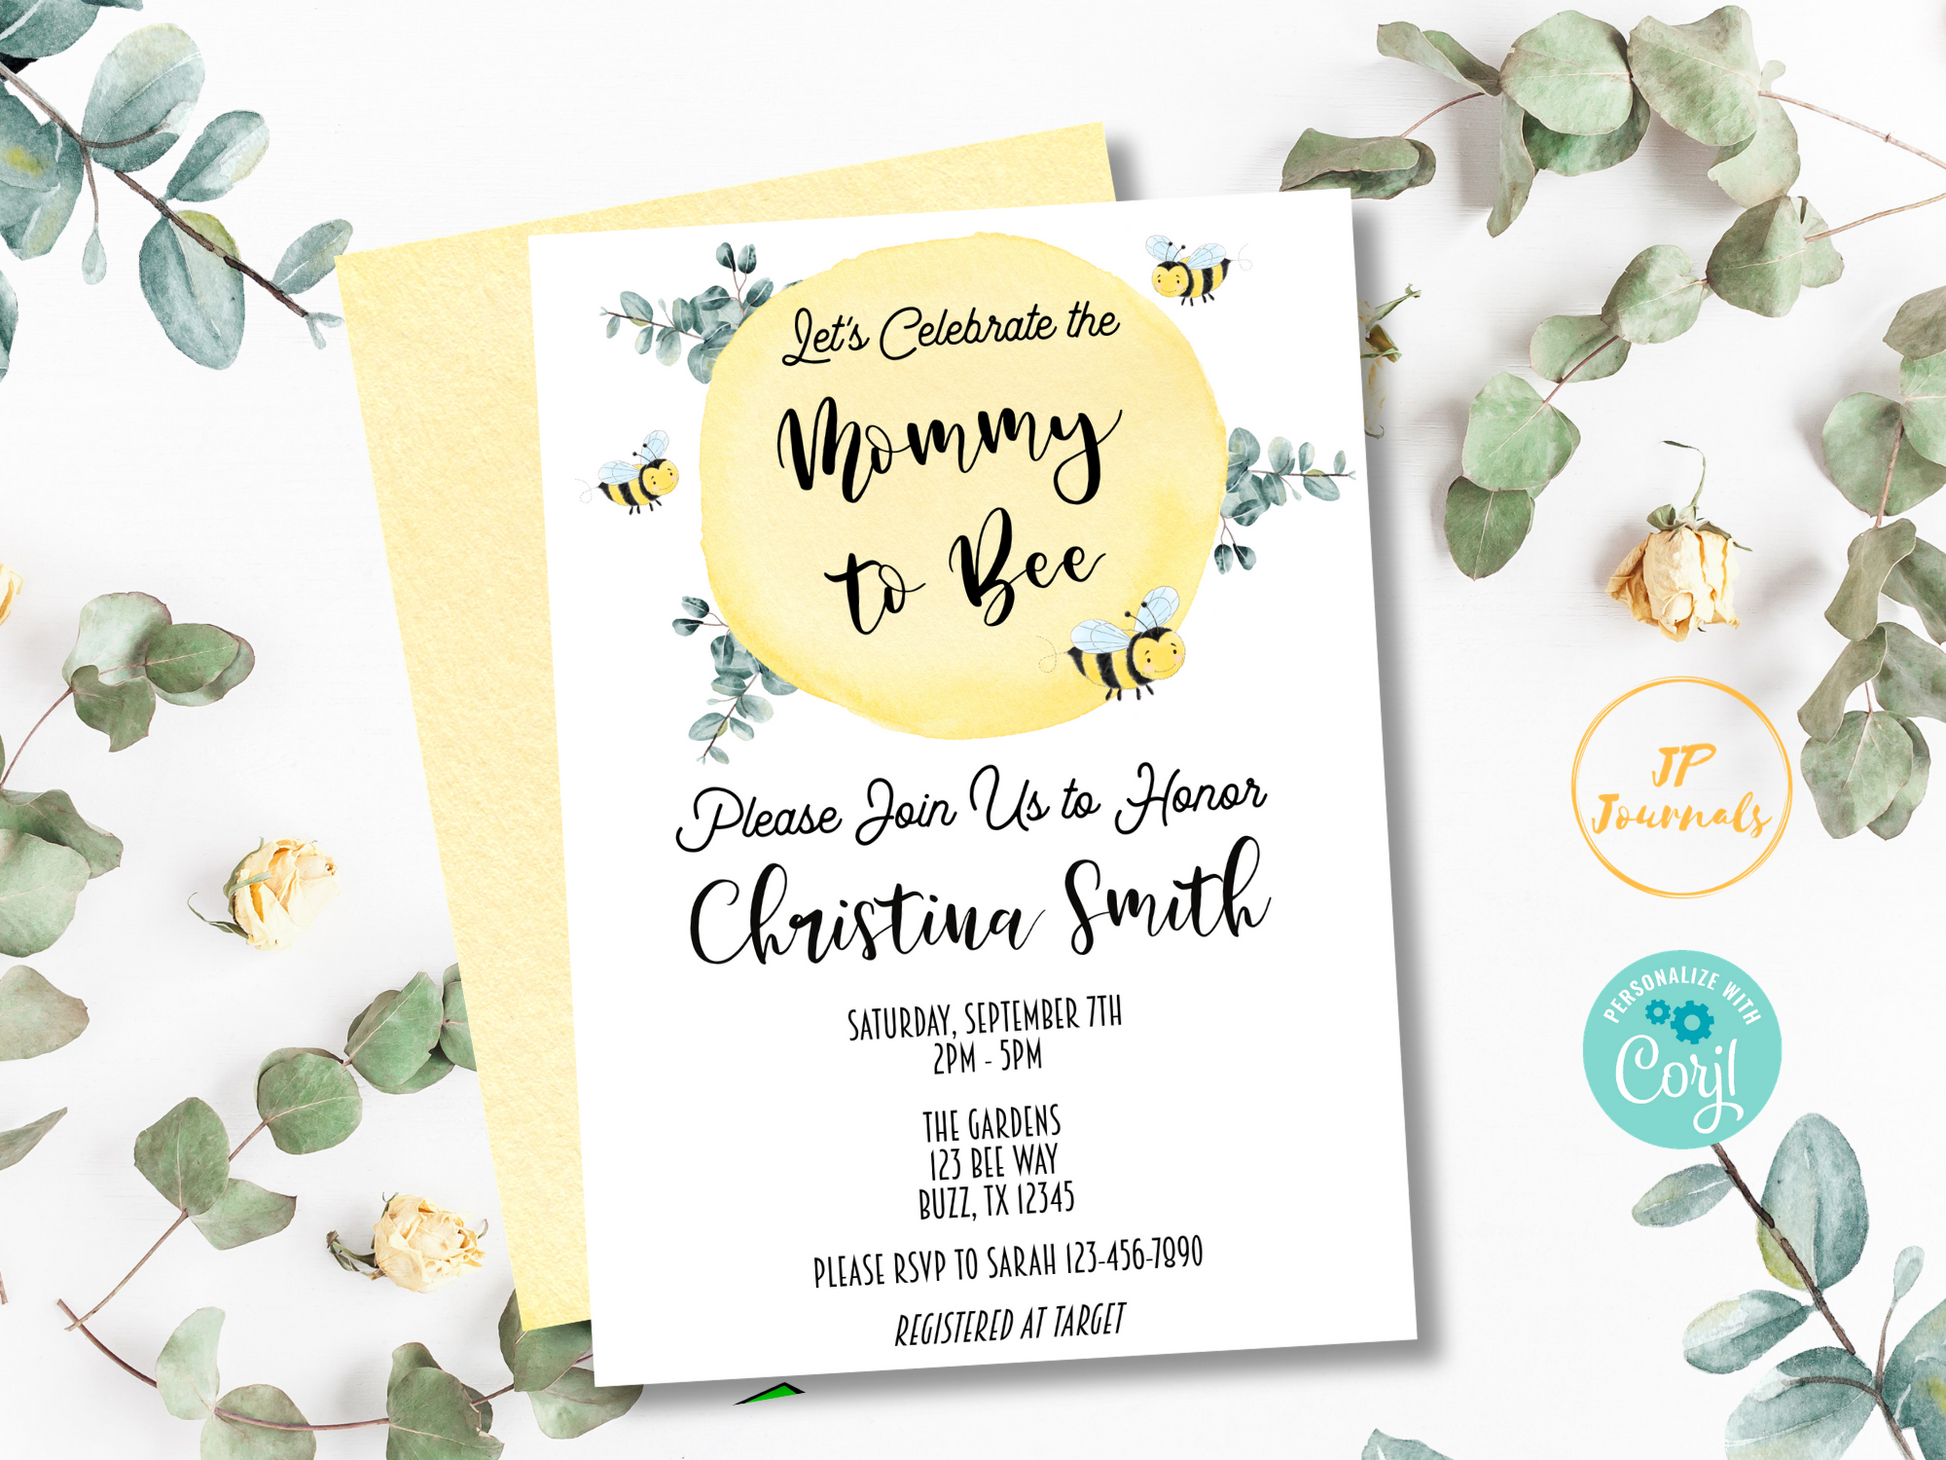 Bee Baby Shower Invite Template, Mommy to Bee Baby Shower Invitation